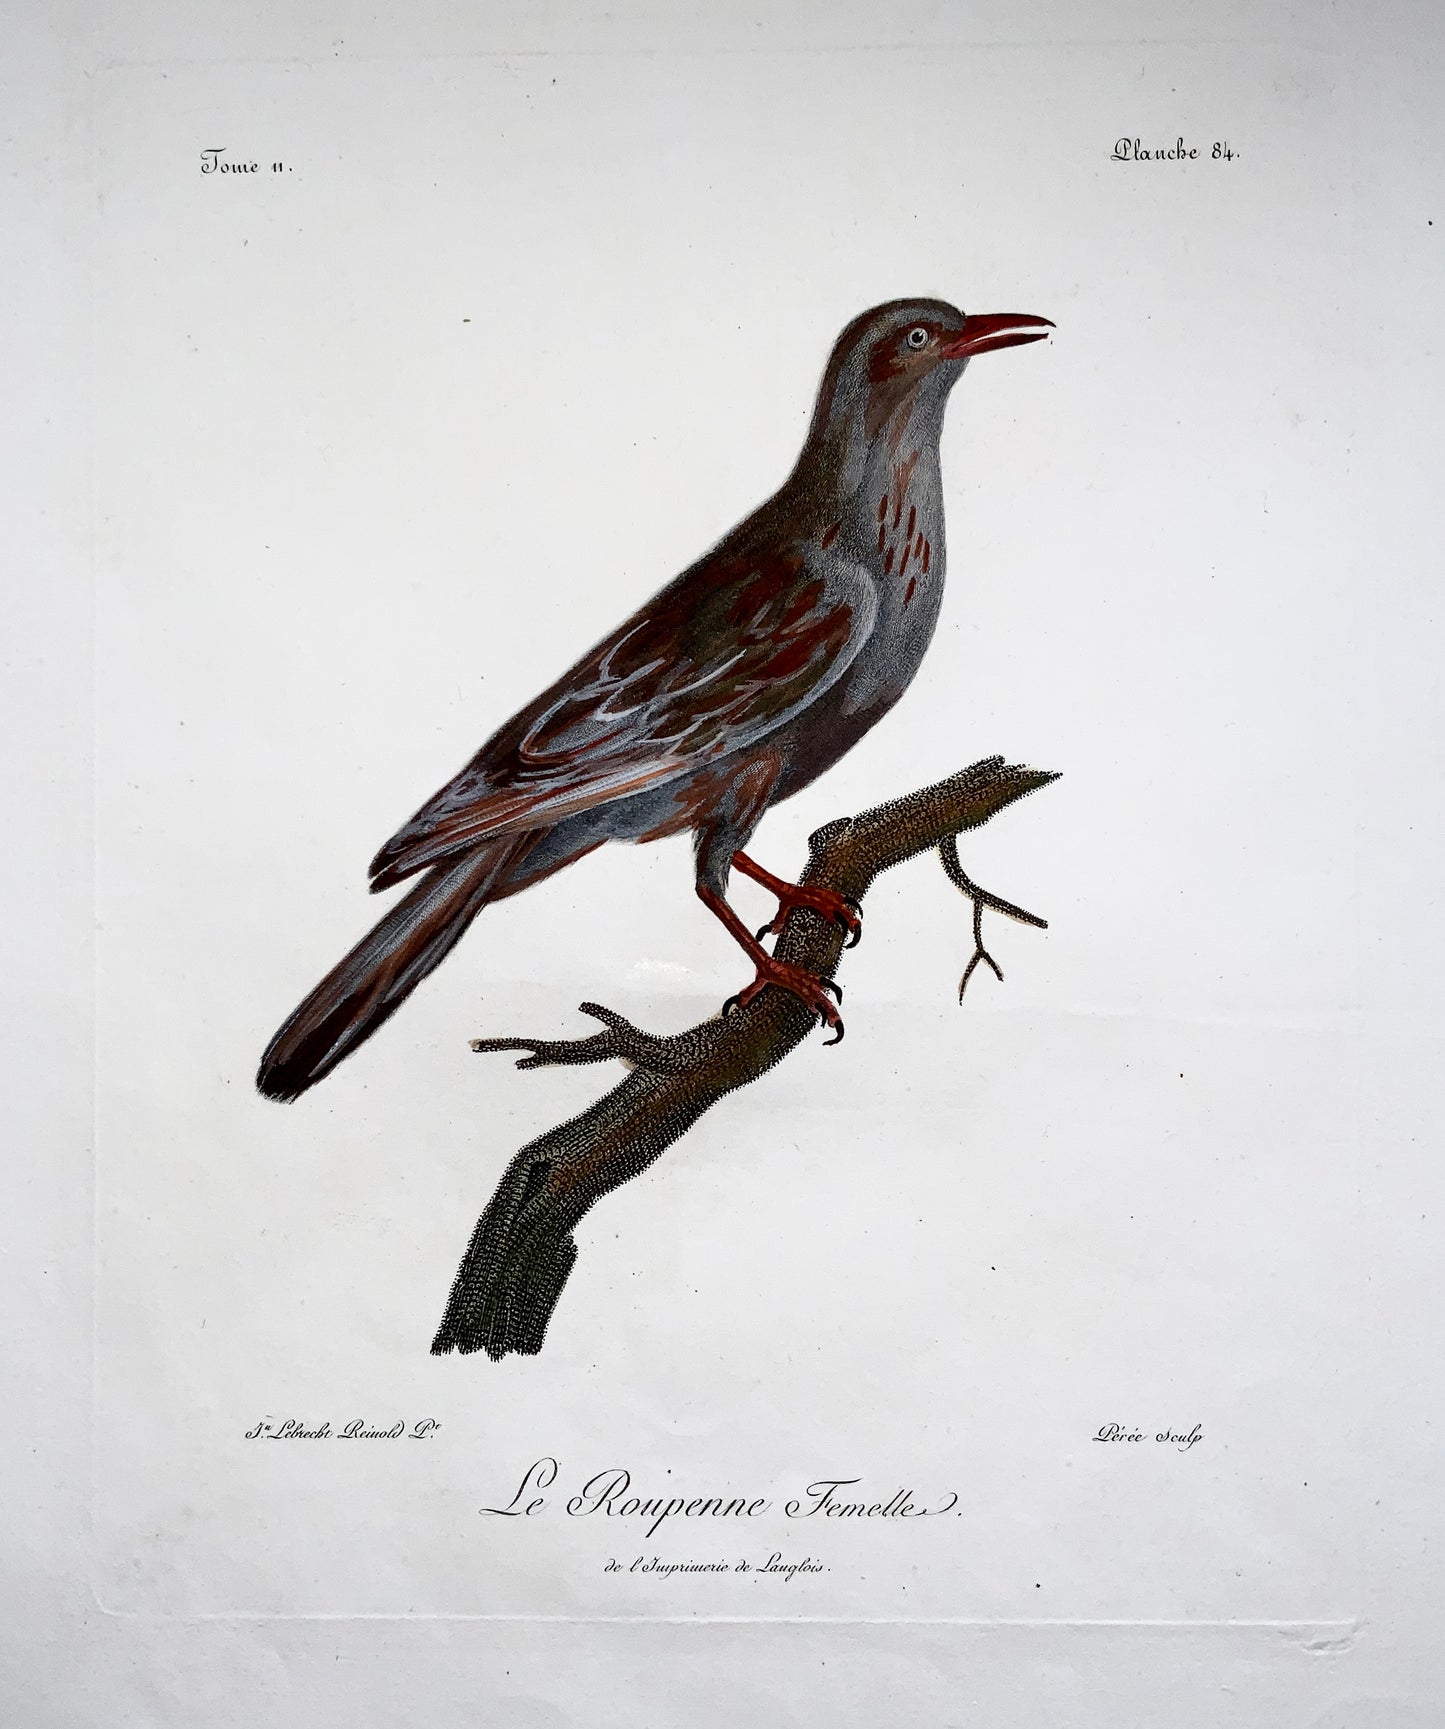 Francois Le Vaillant (1753-1824) Perez after Reinhold - Red-winged Starling - Ornithology